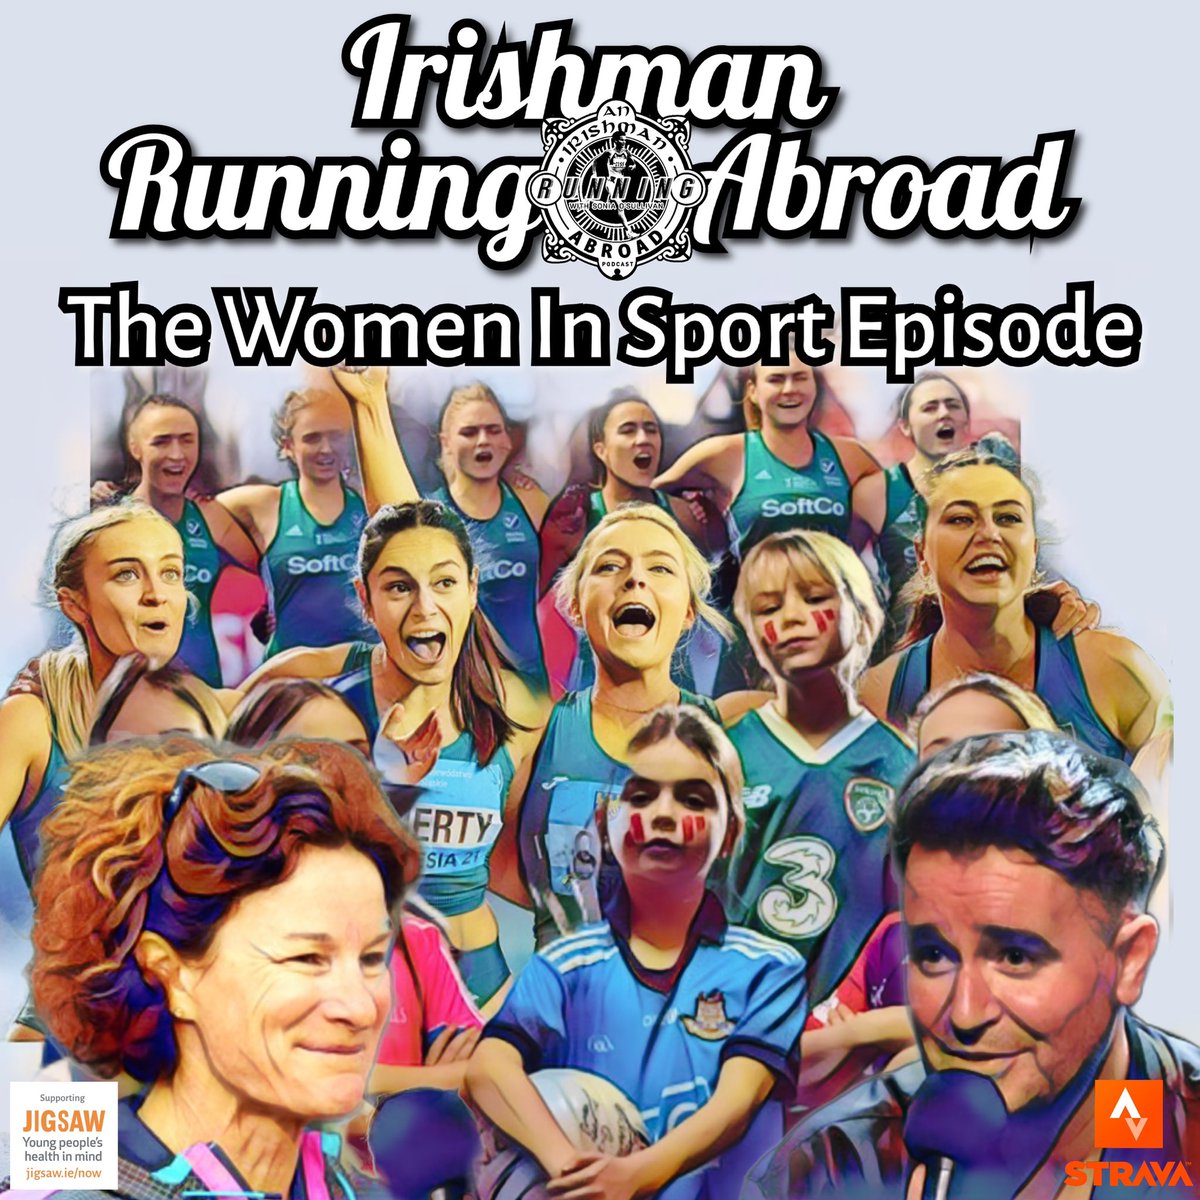 Very special edition of #IrishmanRunningAbroad with @soniaagrith focusing on how far we have come in changing the culture of women in sport and how far we have to go. We talk about her experience & how parents can keep their girls involved. Please share m.soundcloud.com/an-irishman-ab… 🇮🇪